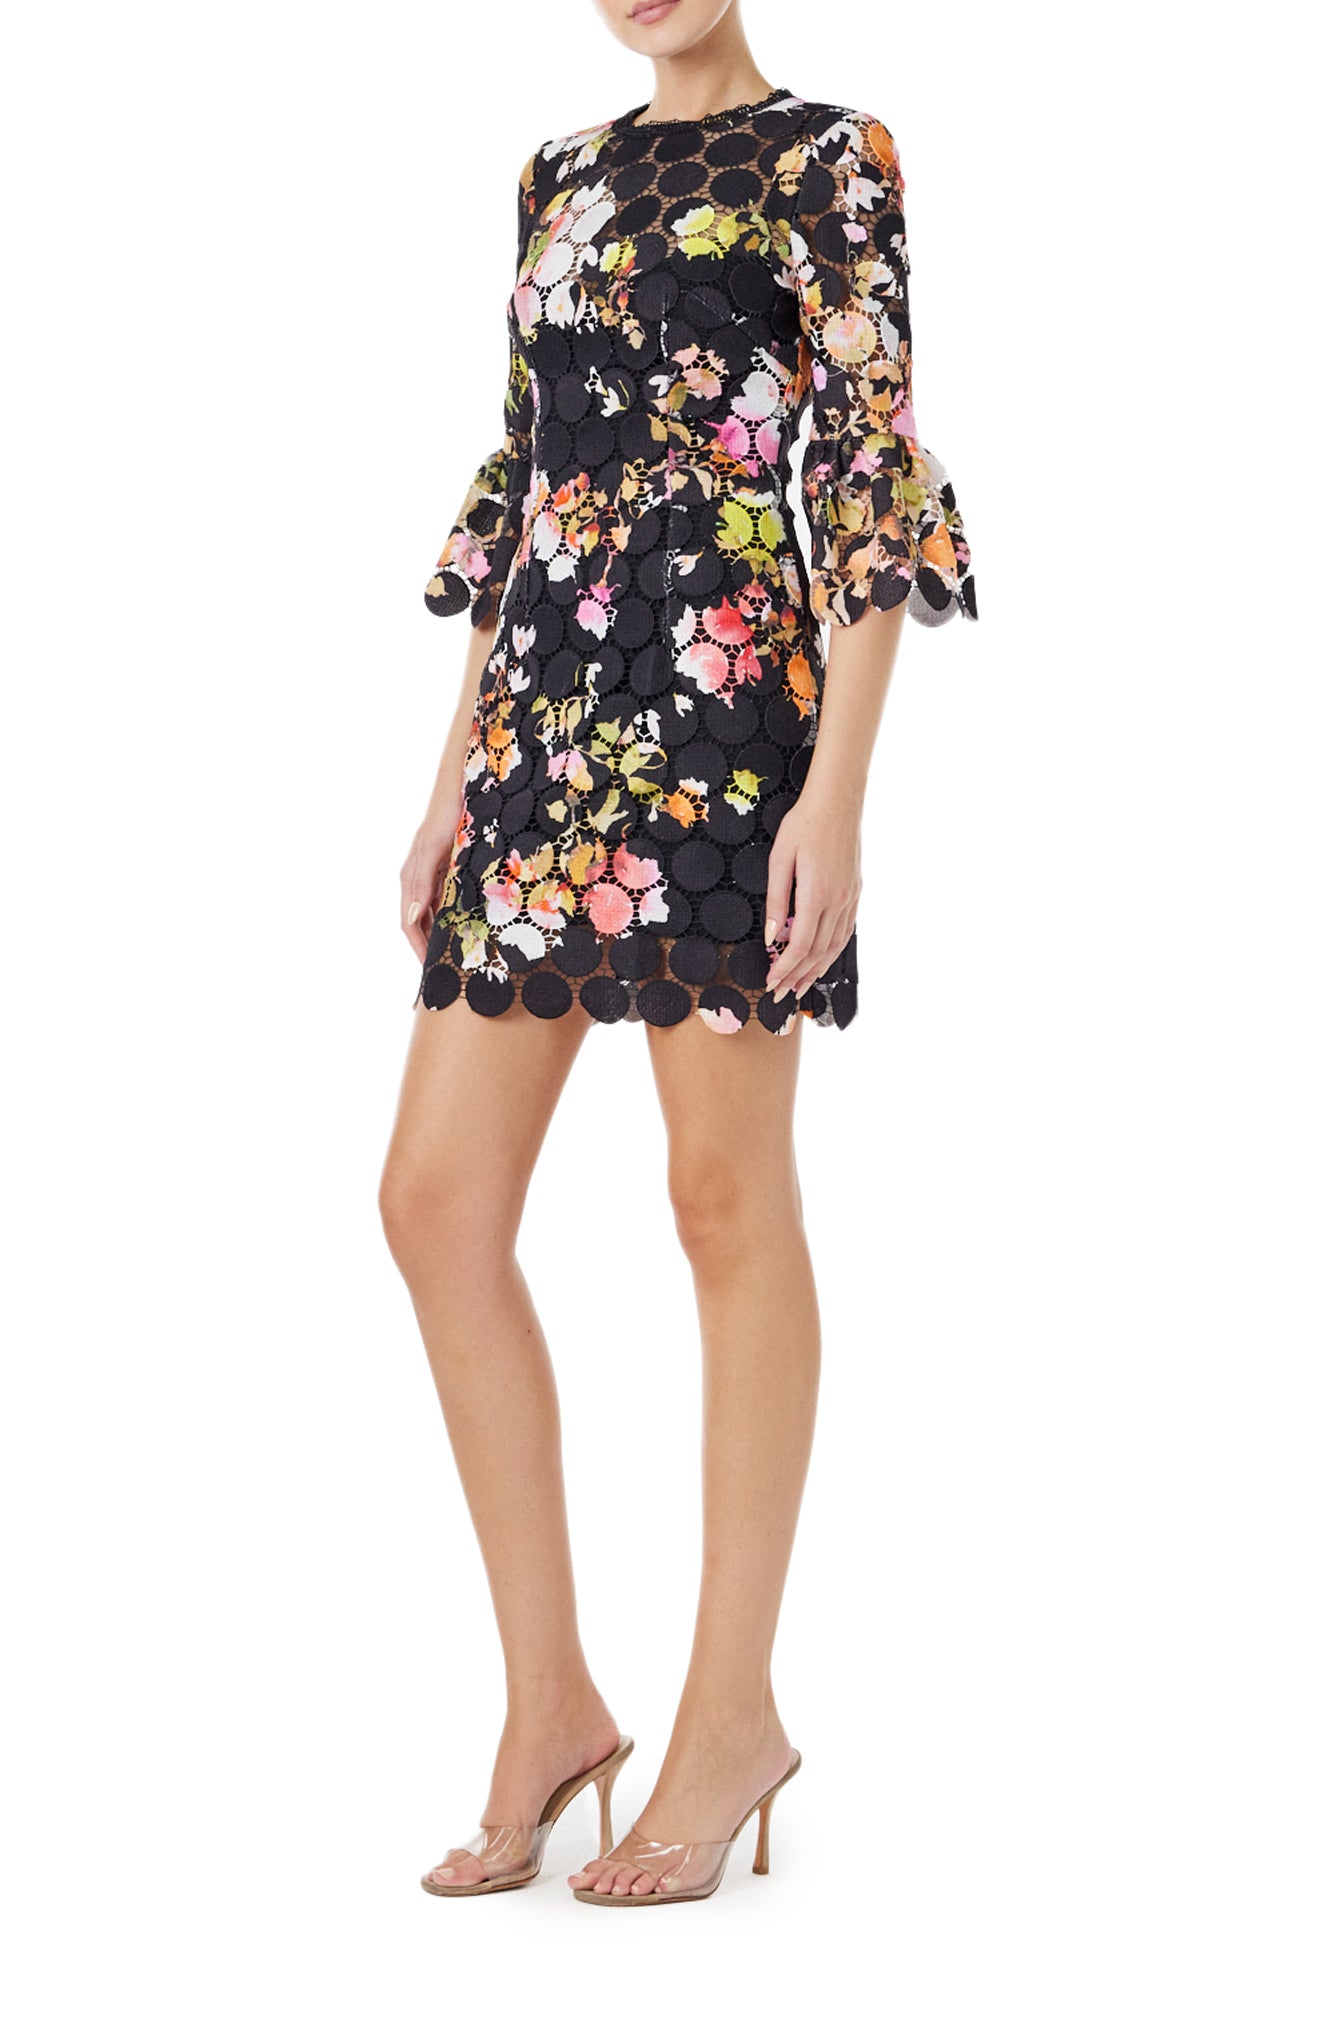 Monique Lhuillier Spring 2024 jewel neck mini dress in black/floral printed circle lace with bracelet length bell sleeves - left side.